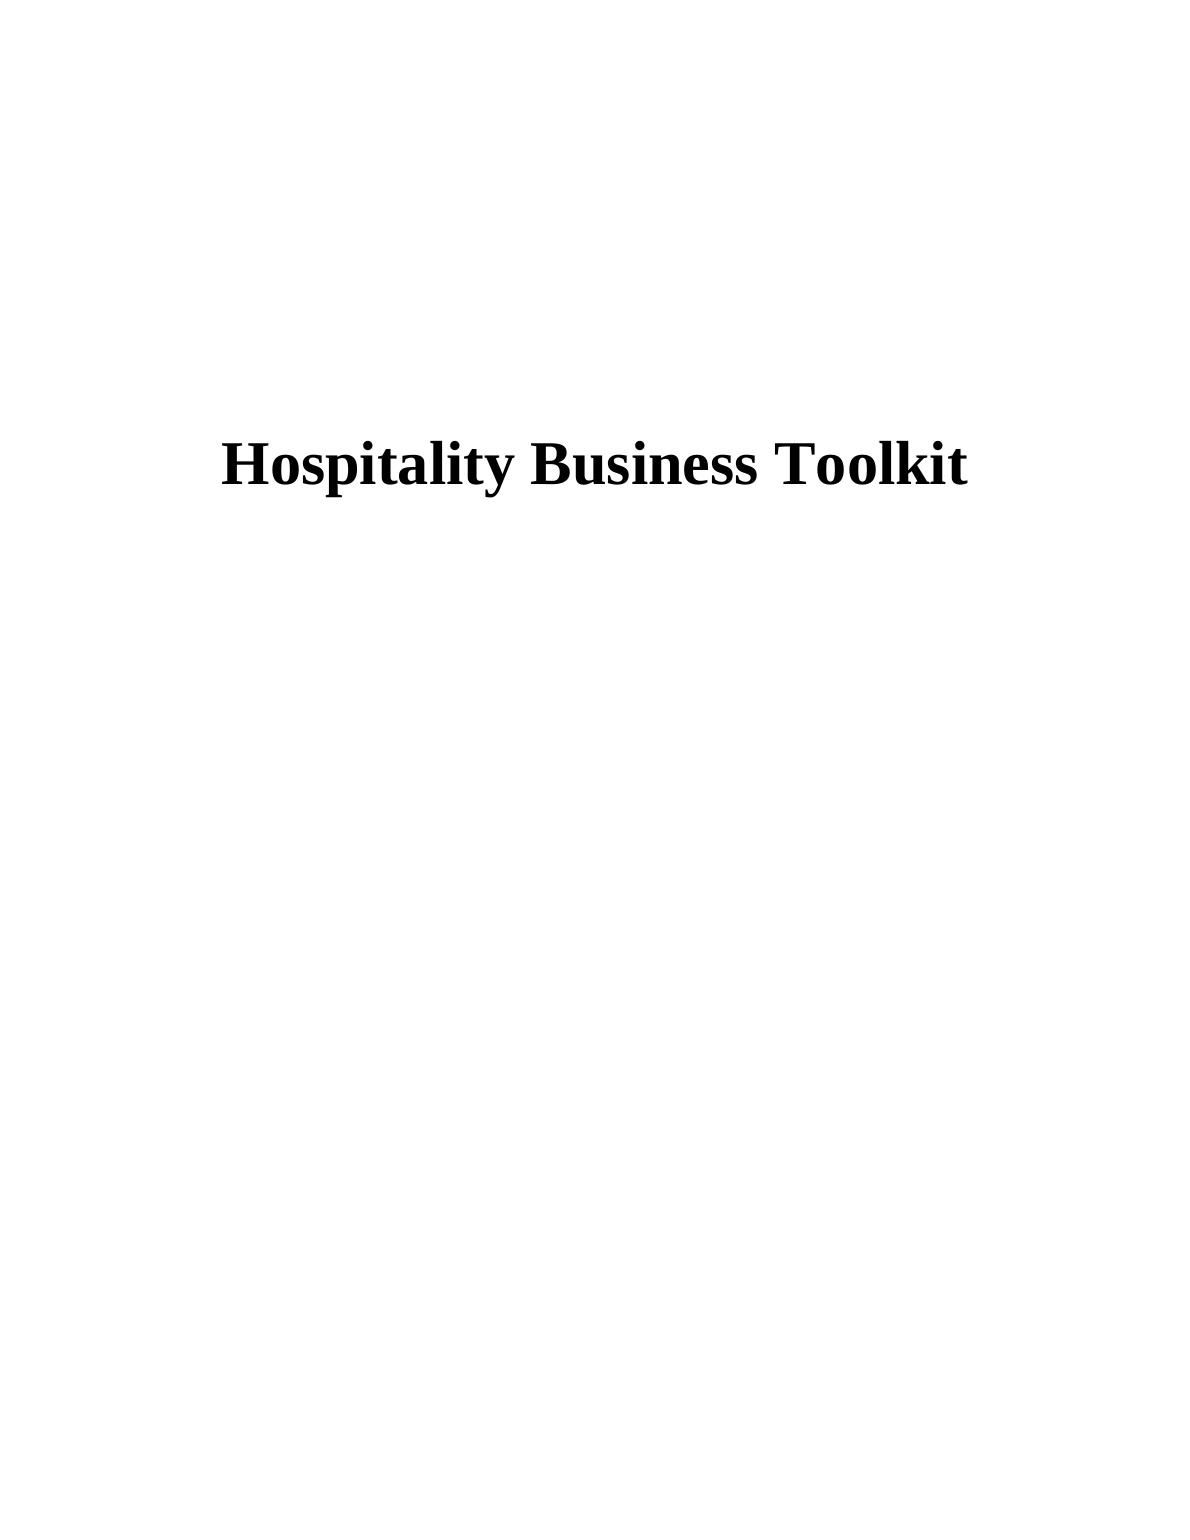 Introduction to bookkeeping system of debits and credits for hospitality business toolkit_1